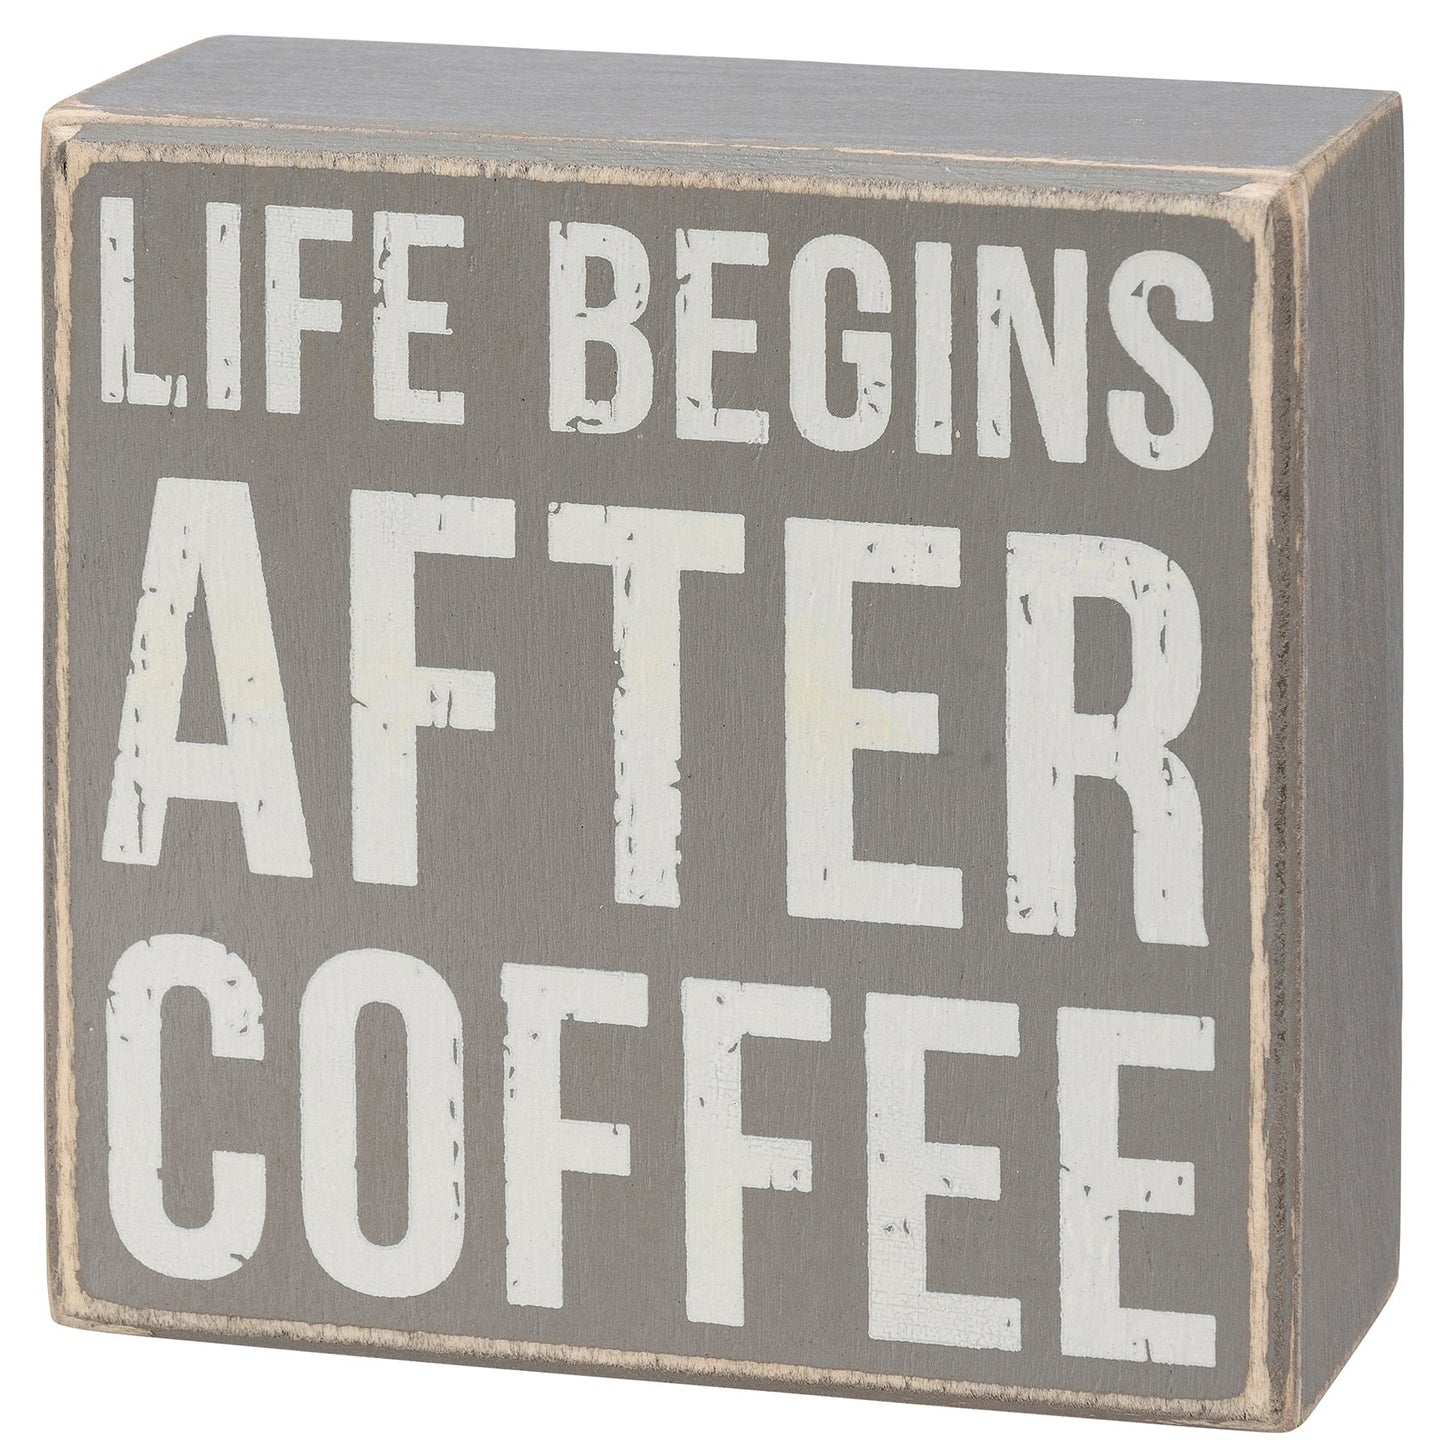 After Coffee Box Sign Set | Wall Desk Display Gift Set | 4" x 4"